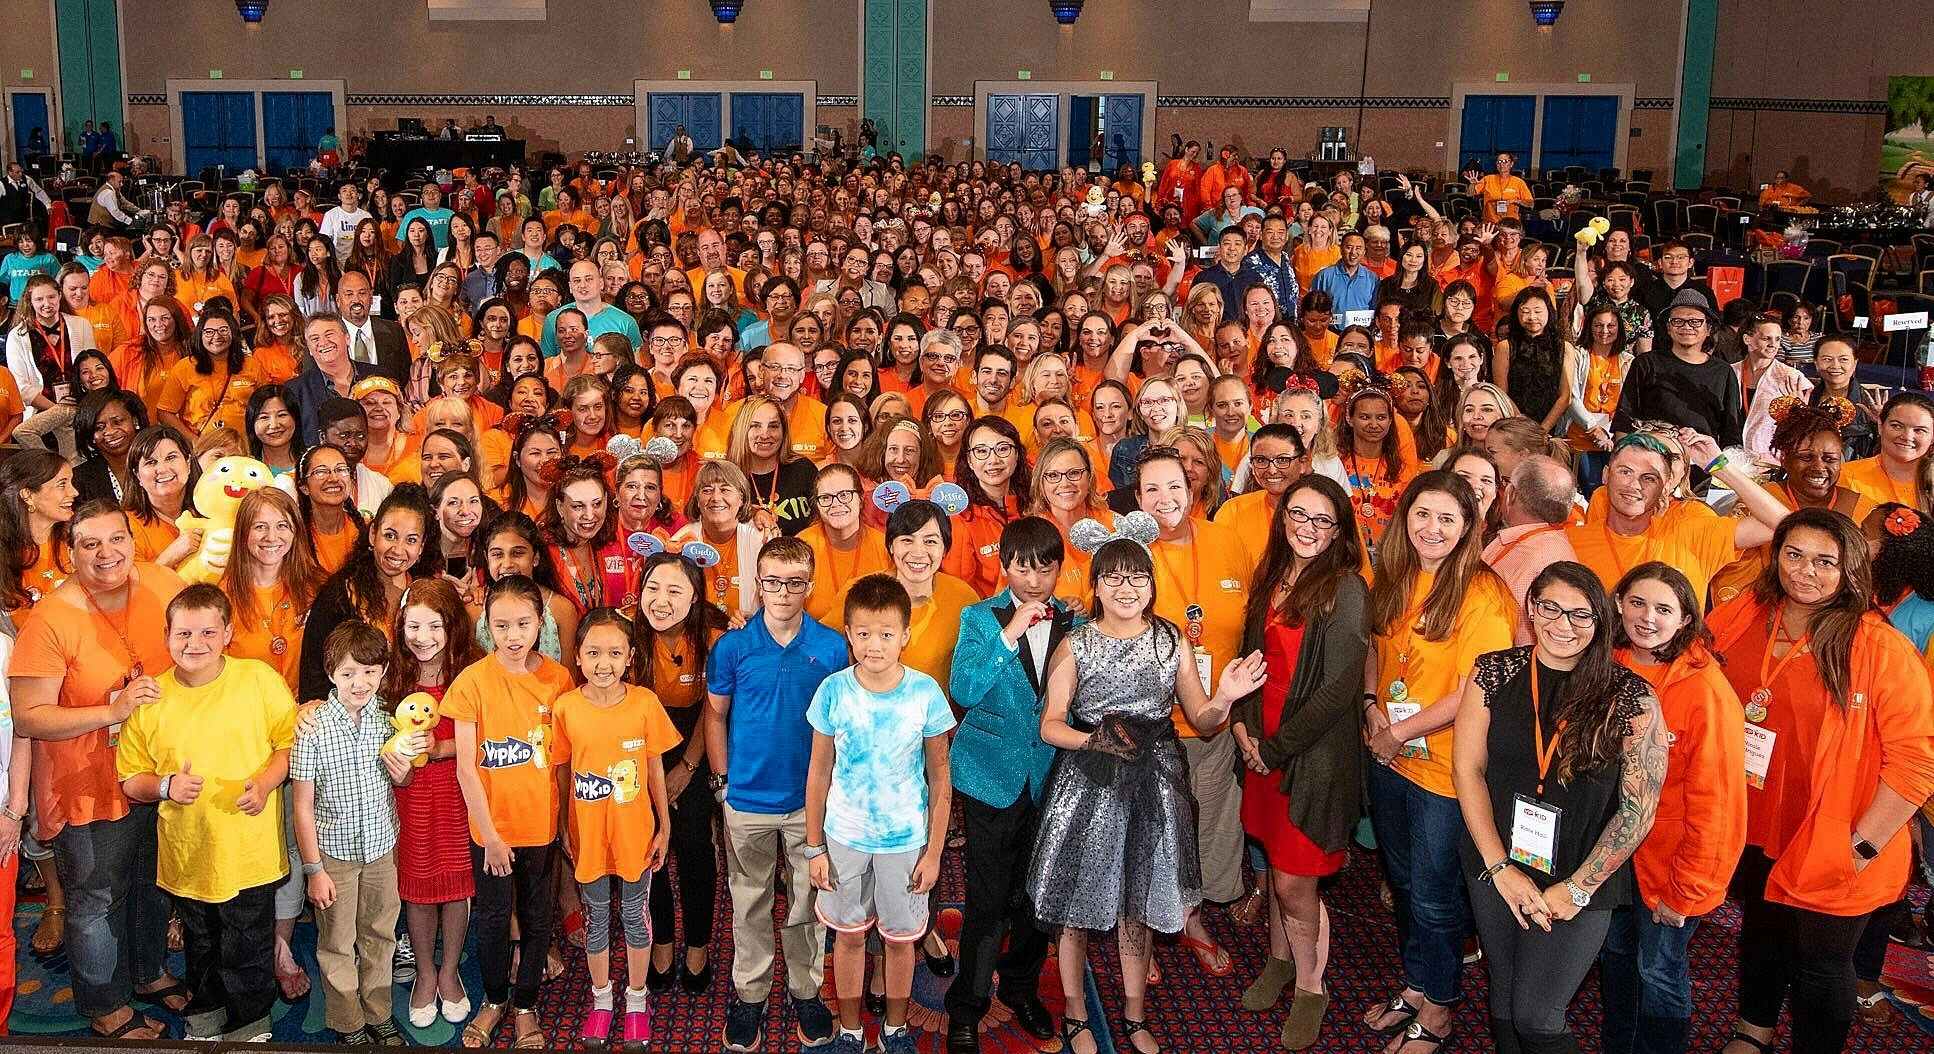 VipKID gathering in 2018 of students and teachers